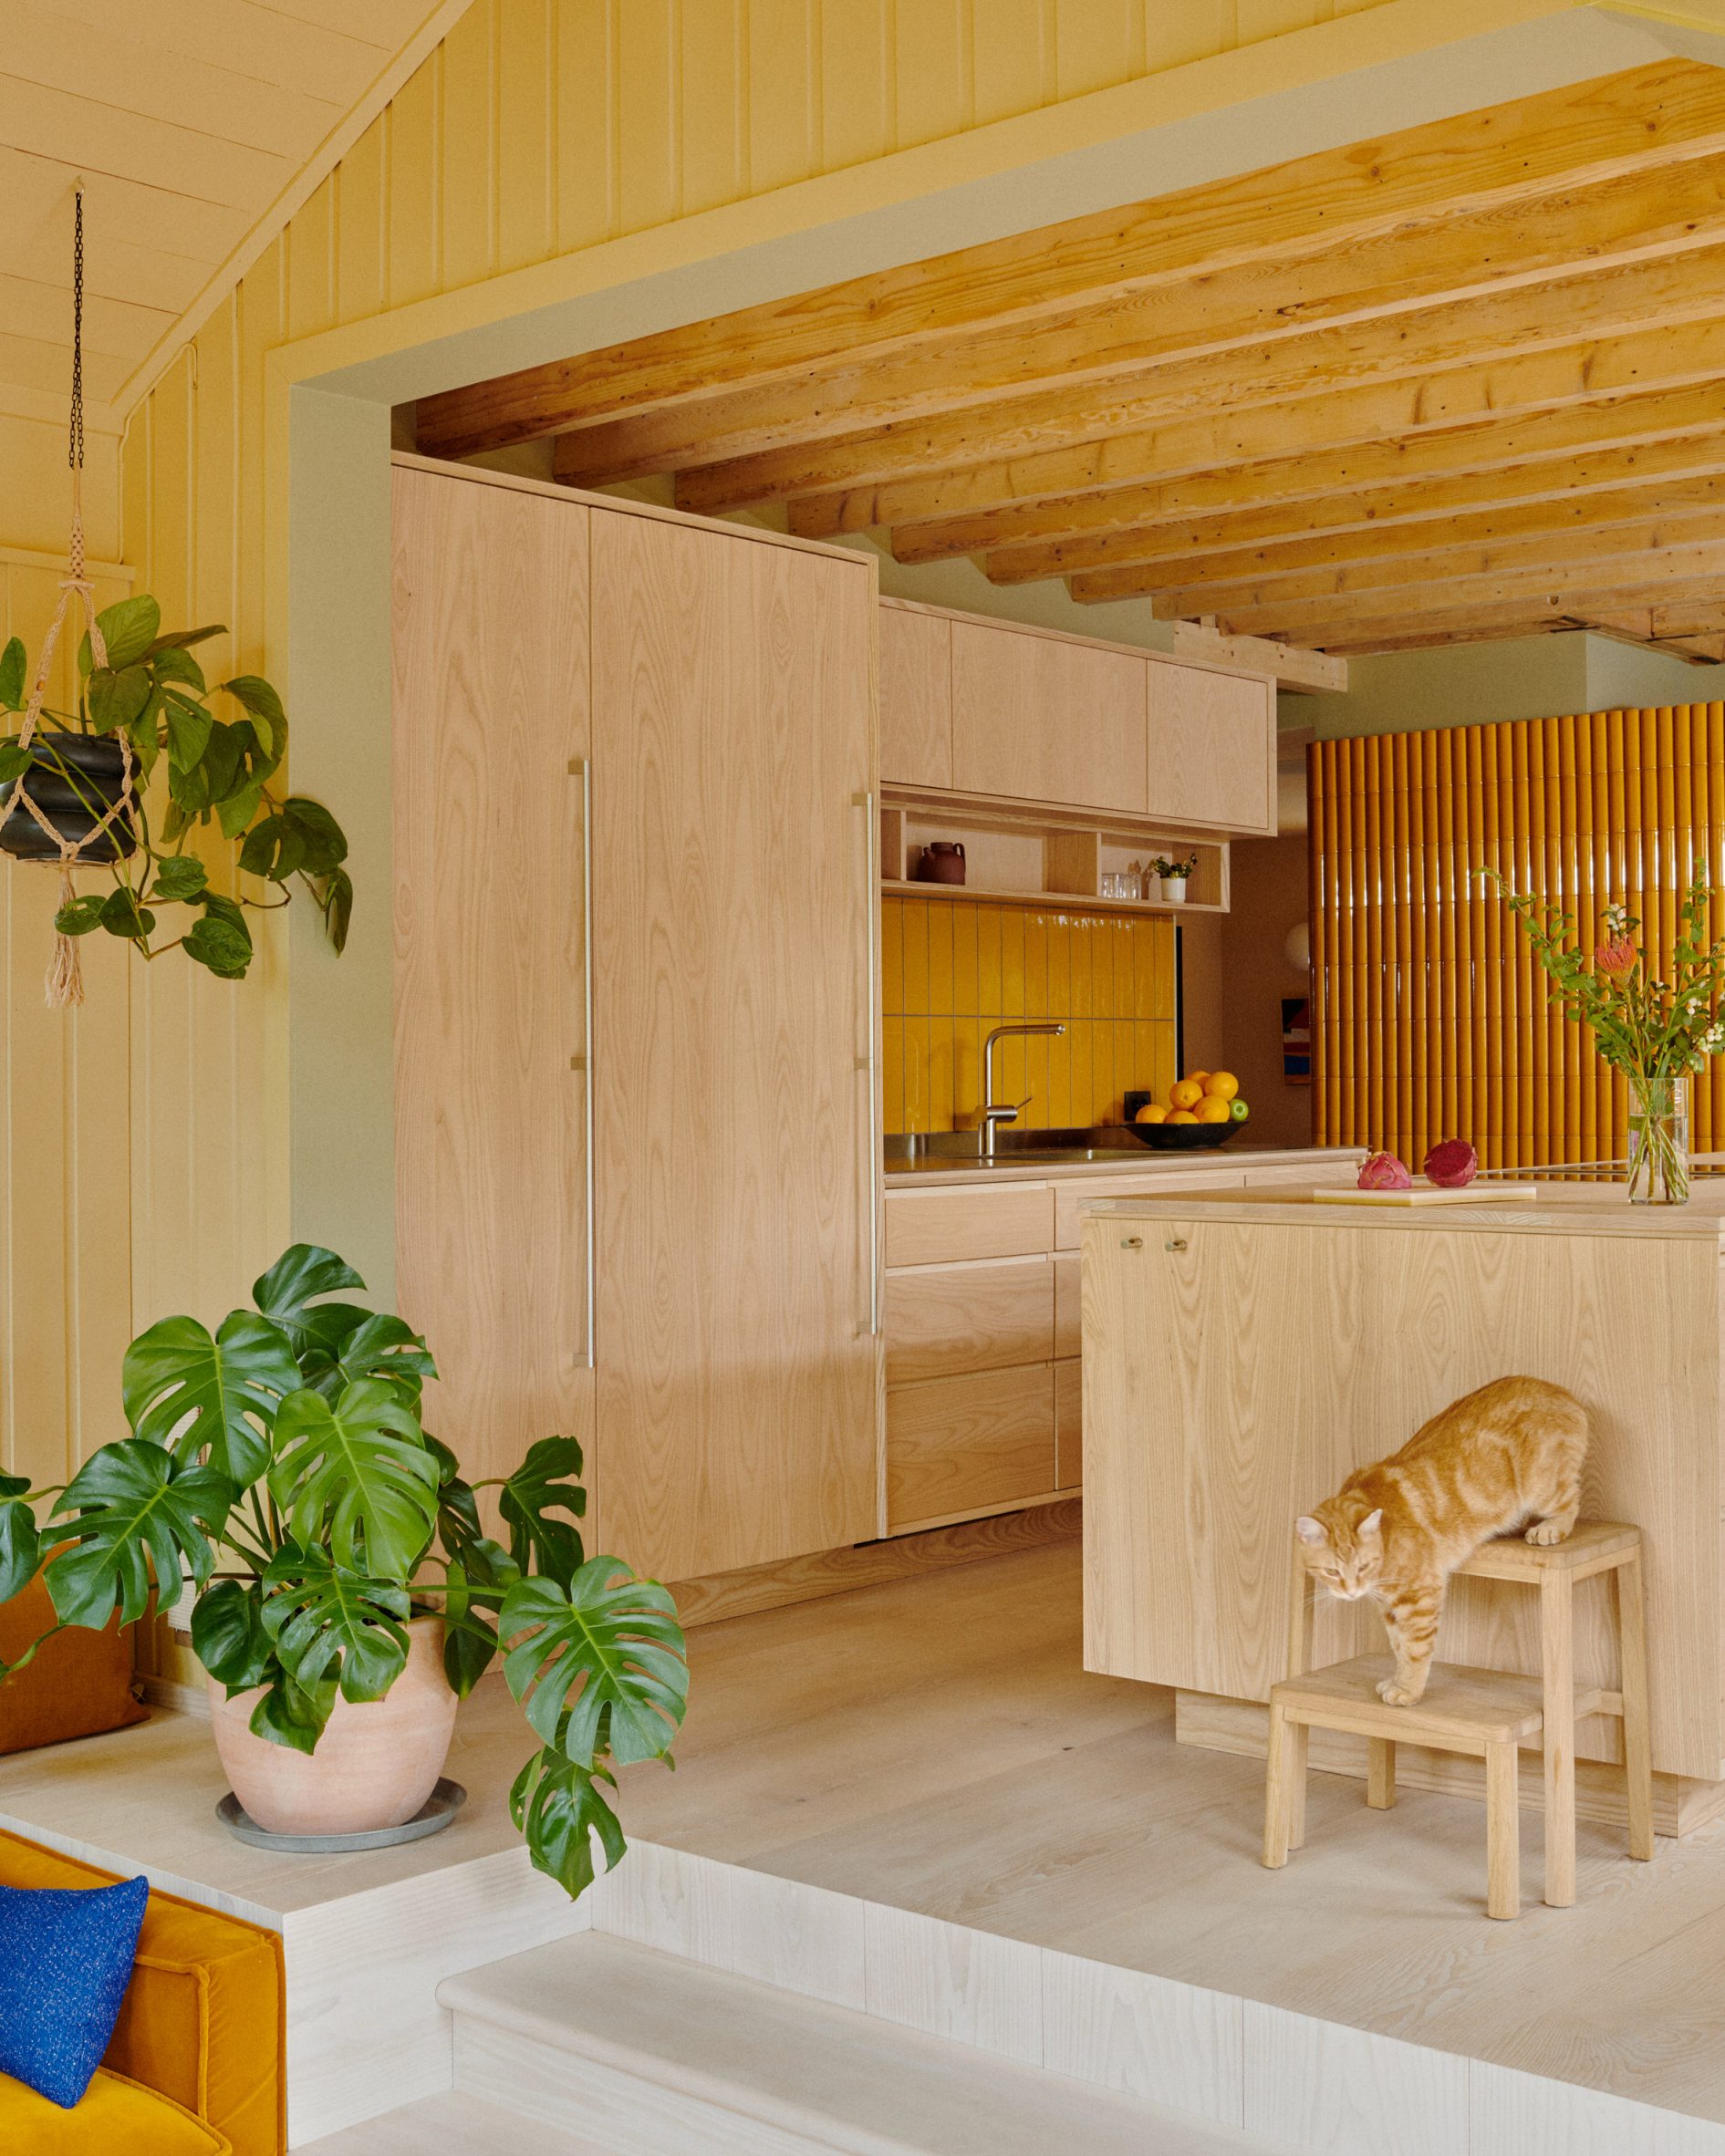 Kitchen with ask cabinets and yellow tile splashback and cat